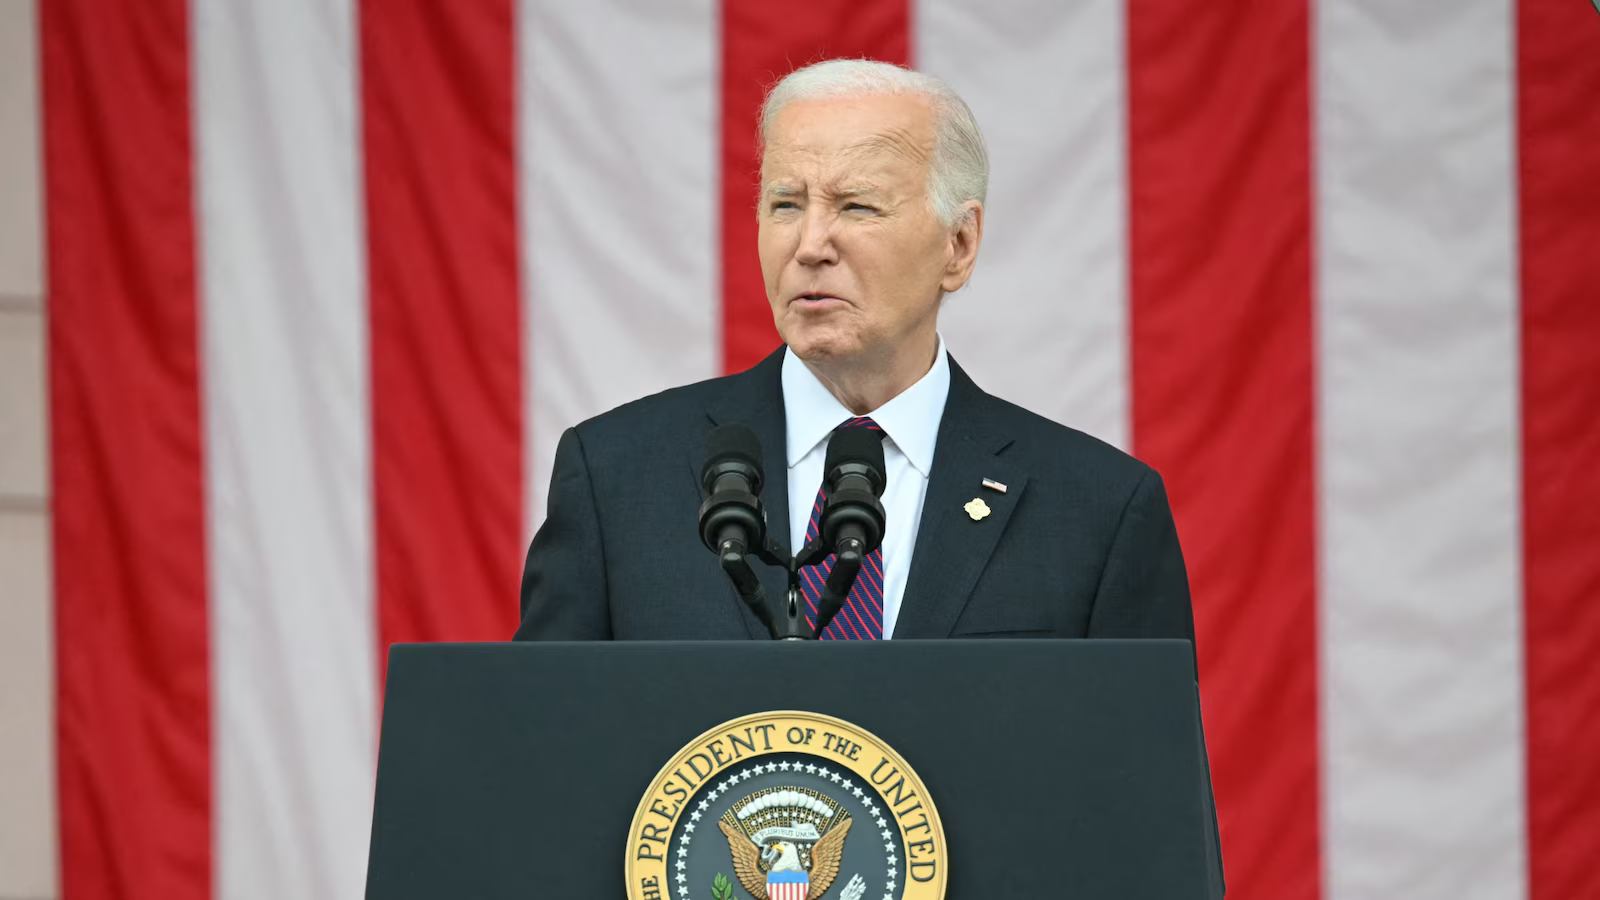 Biden Honors Fallen Soldiers and Veterans at Arlington, Contrasts with Trump's Controversial Memorial Day Posts